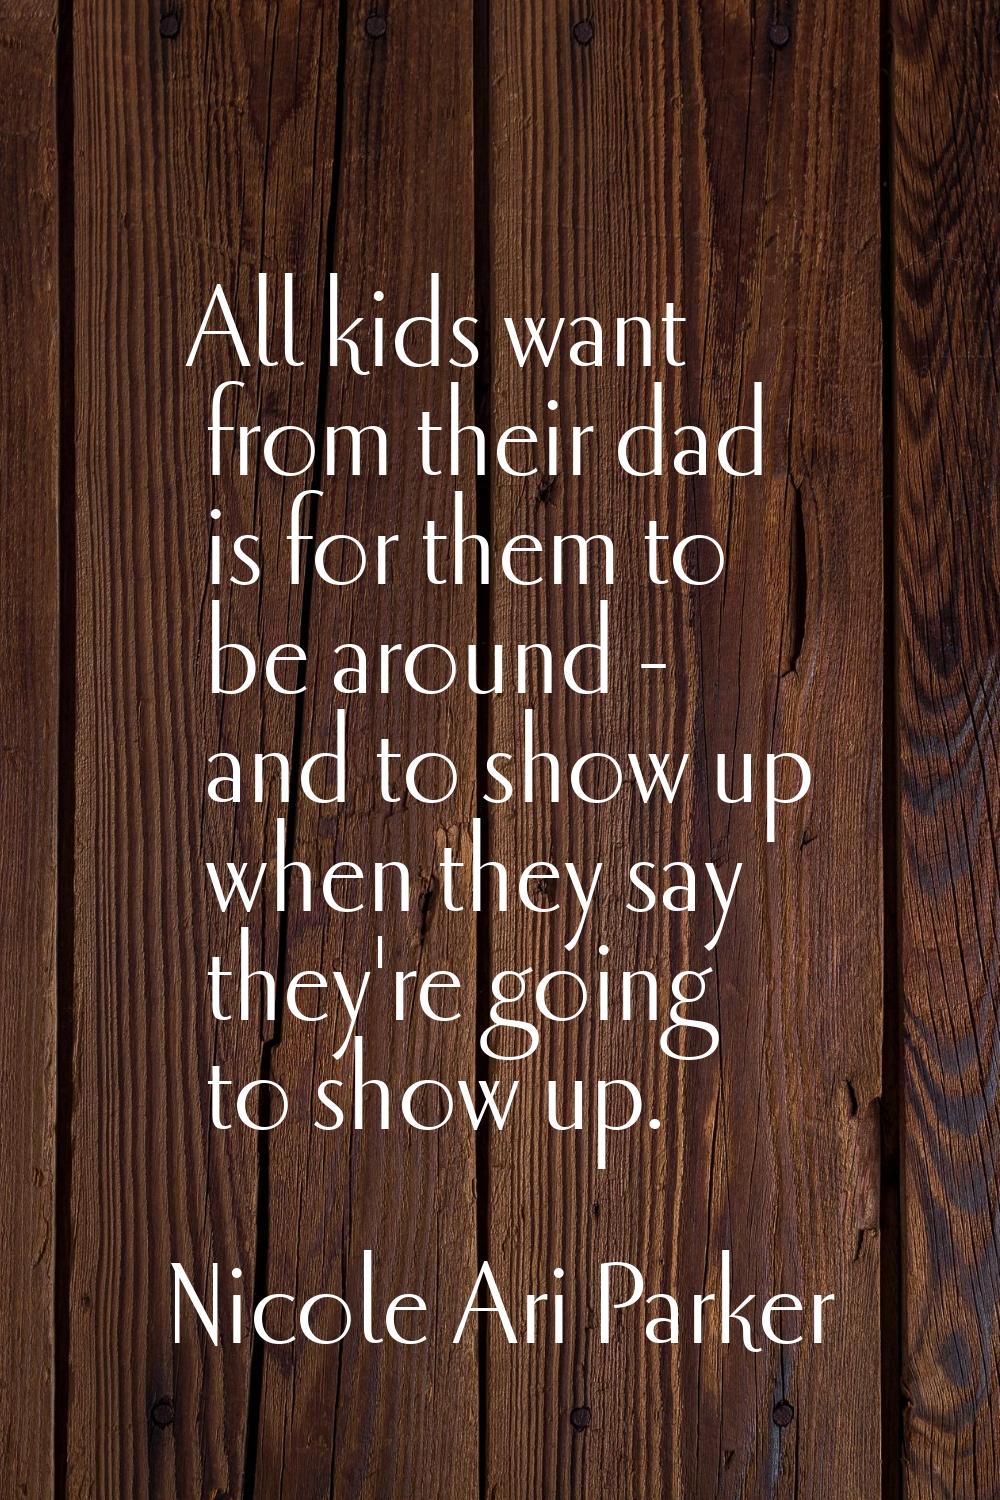 All kids want from their dad is for them to be around - and to show up when they say they're going 